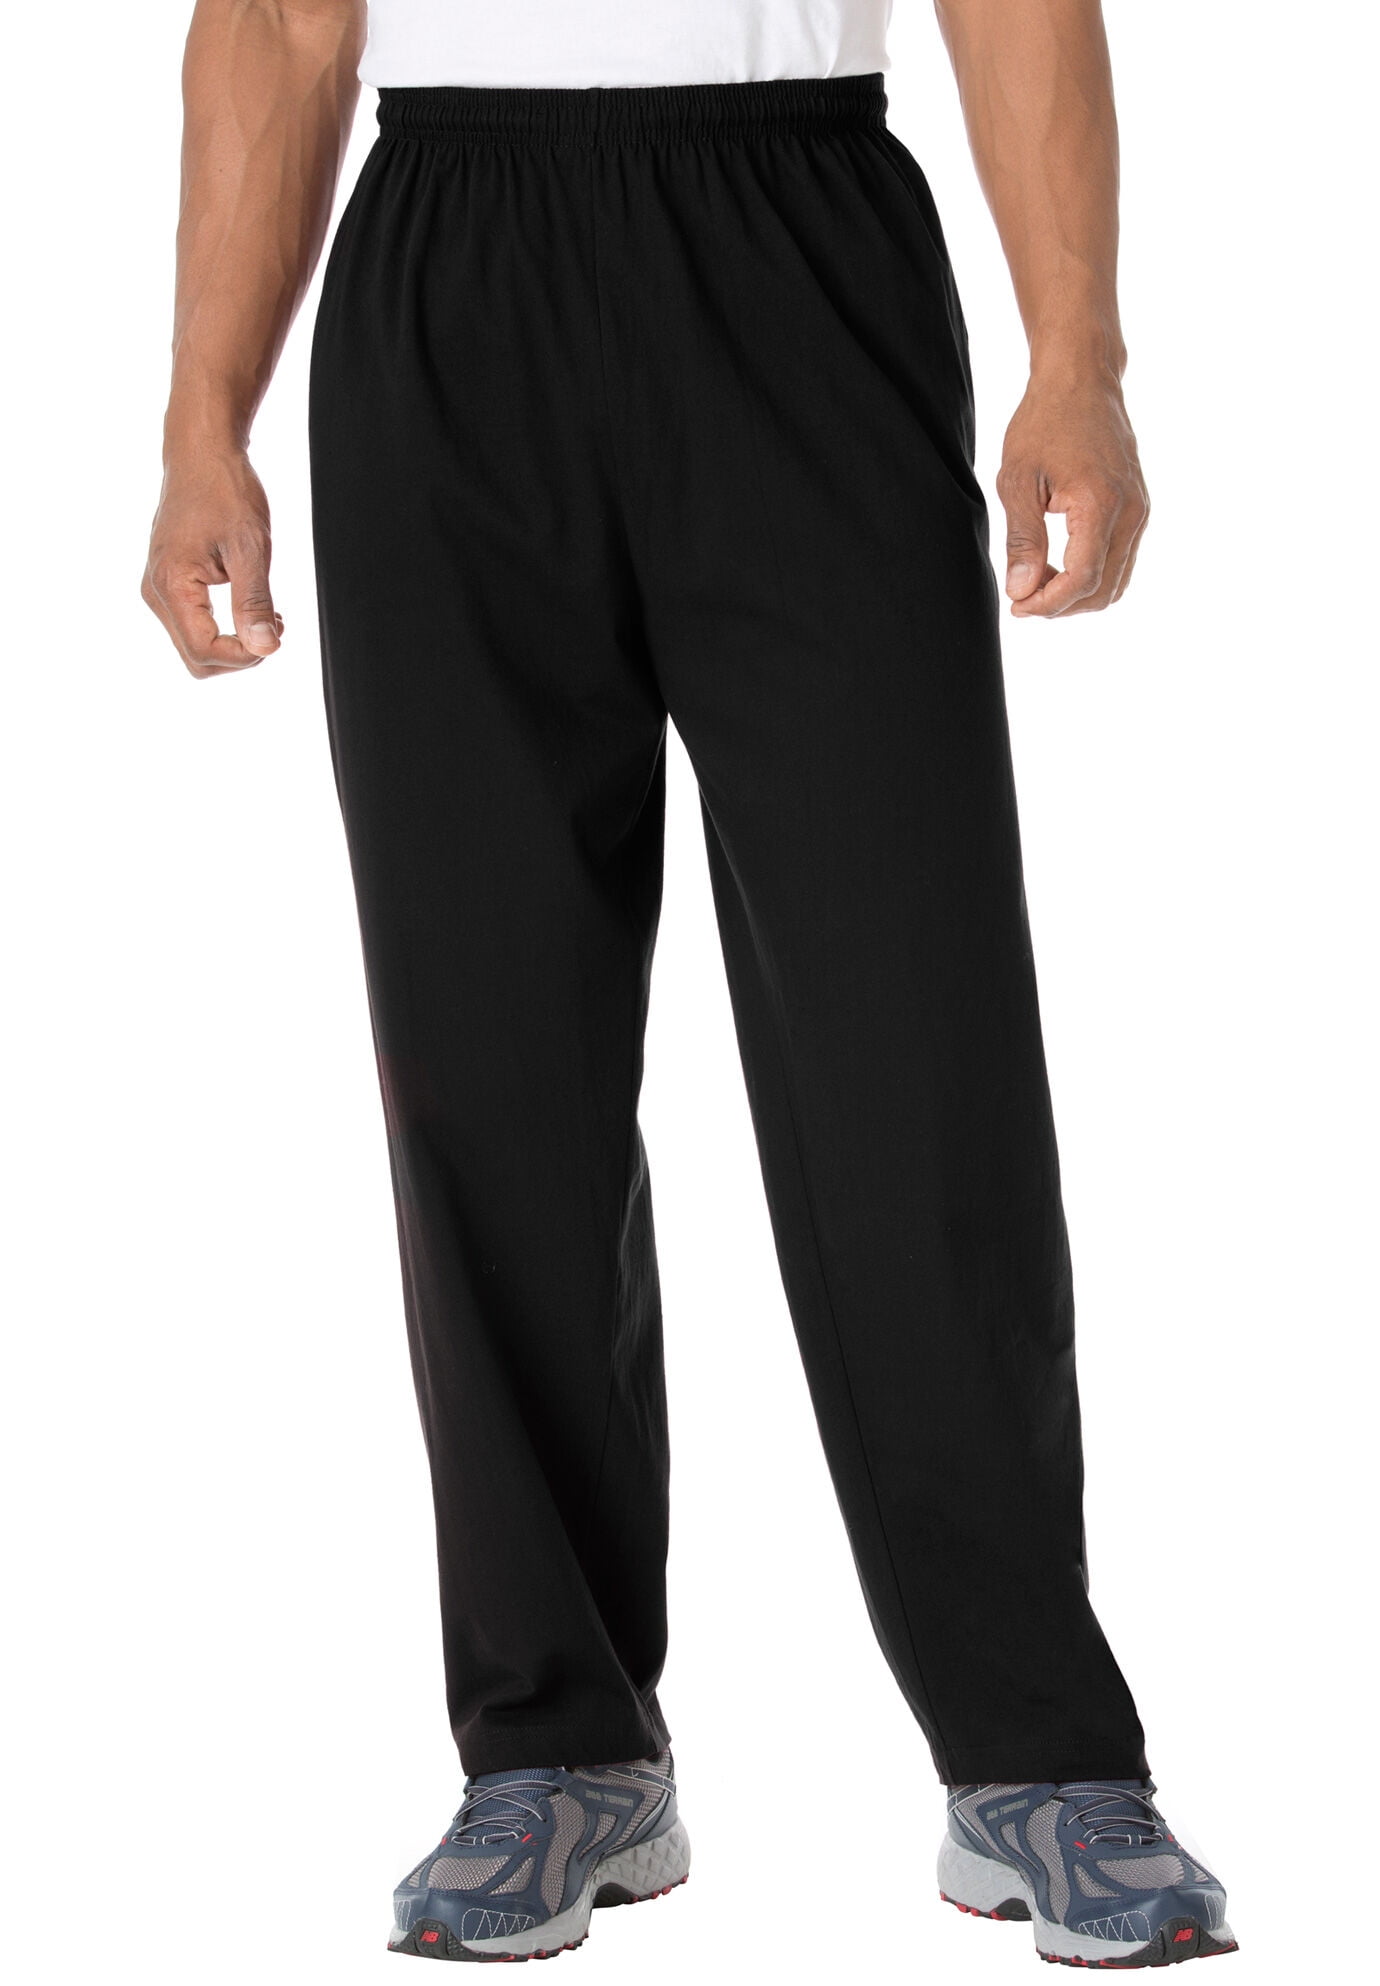 Kingsize Sport Collection Mens Big & Tall Force Cool Power Wicking Pants